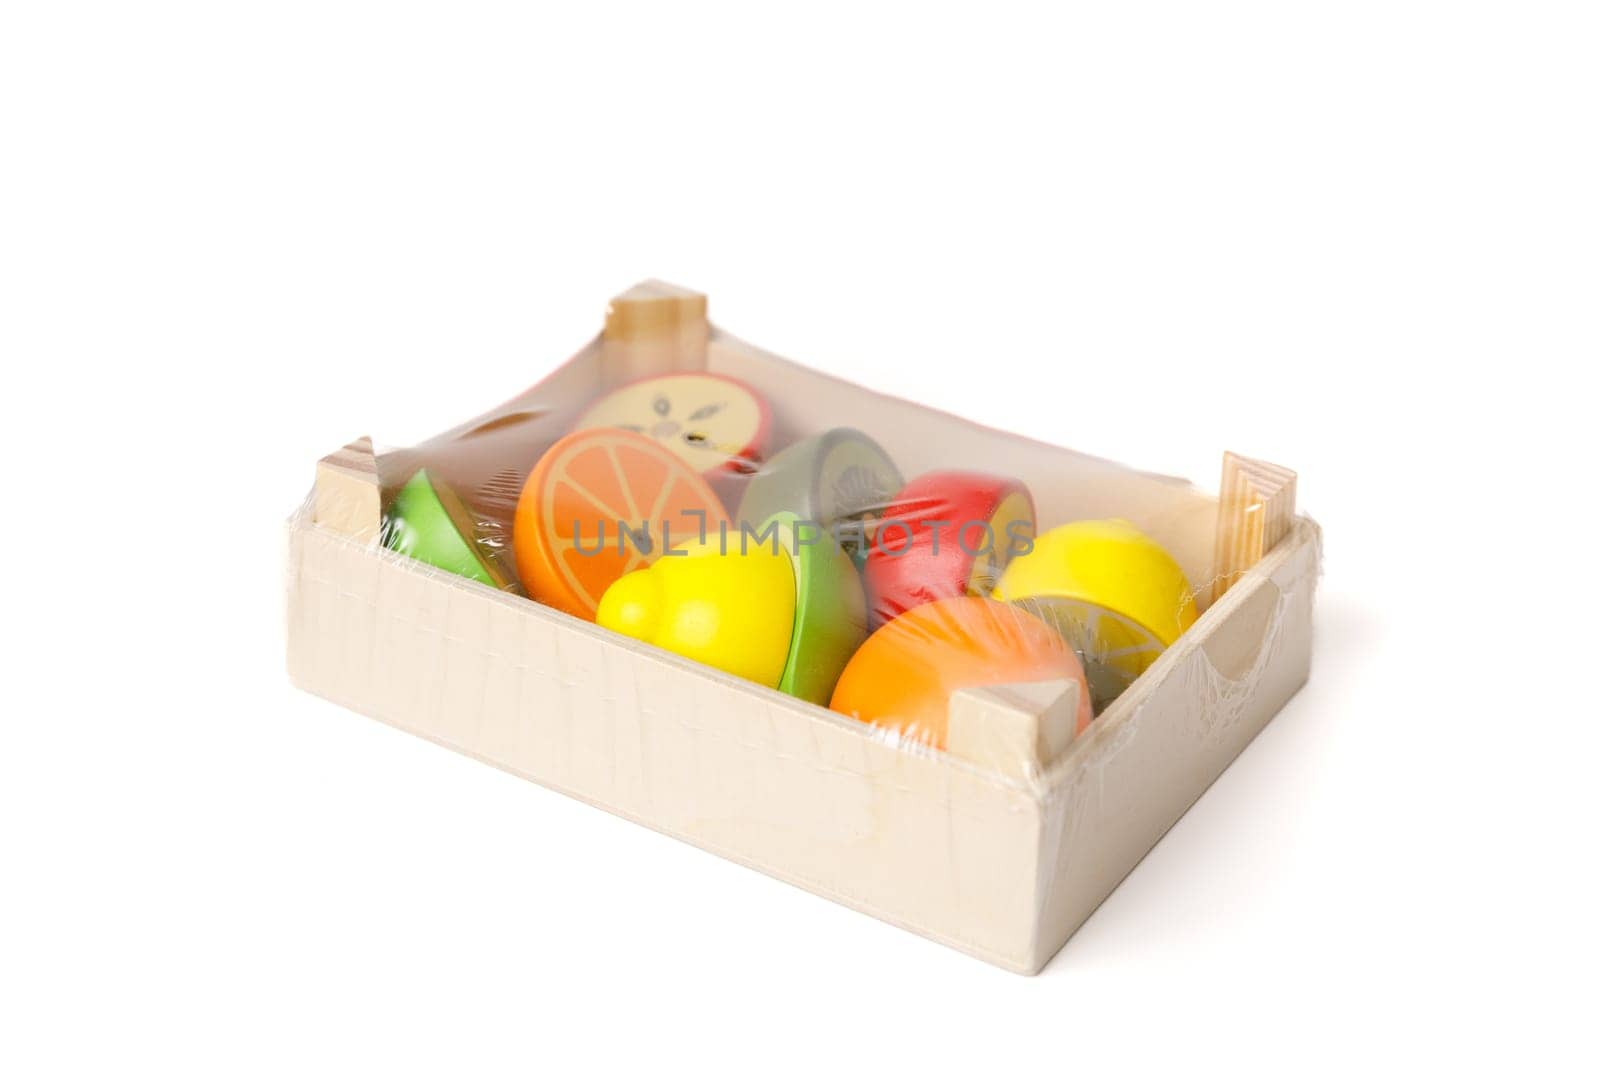 A new educational set of wooden toys in the form of fruits and vegetables in a toy wooden box packed in plastic film by Rom4ek